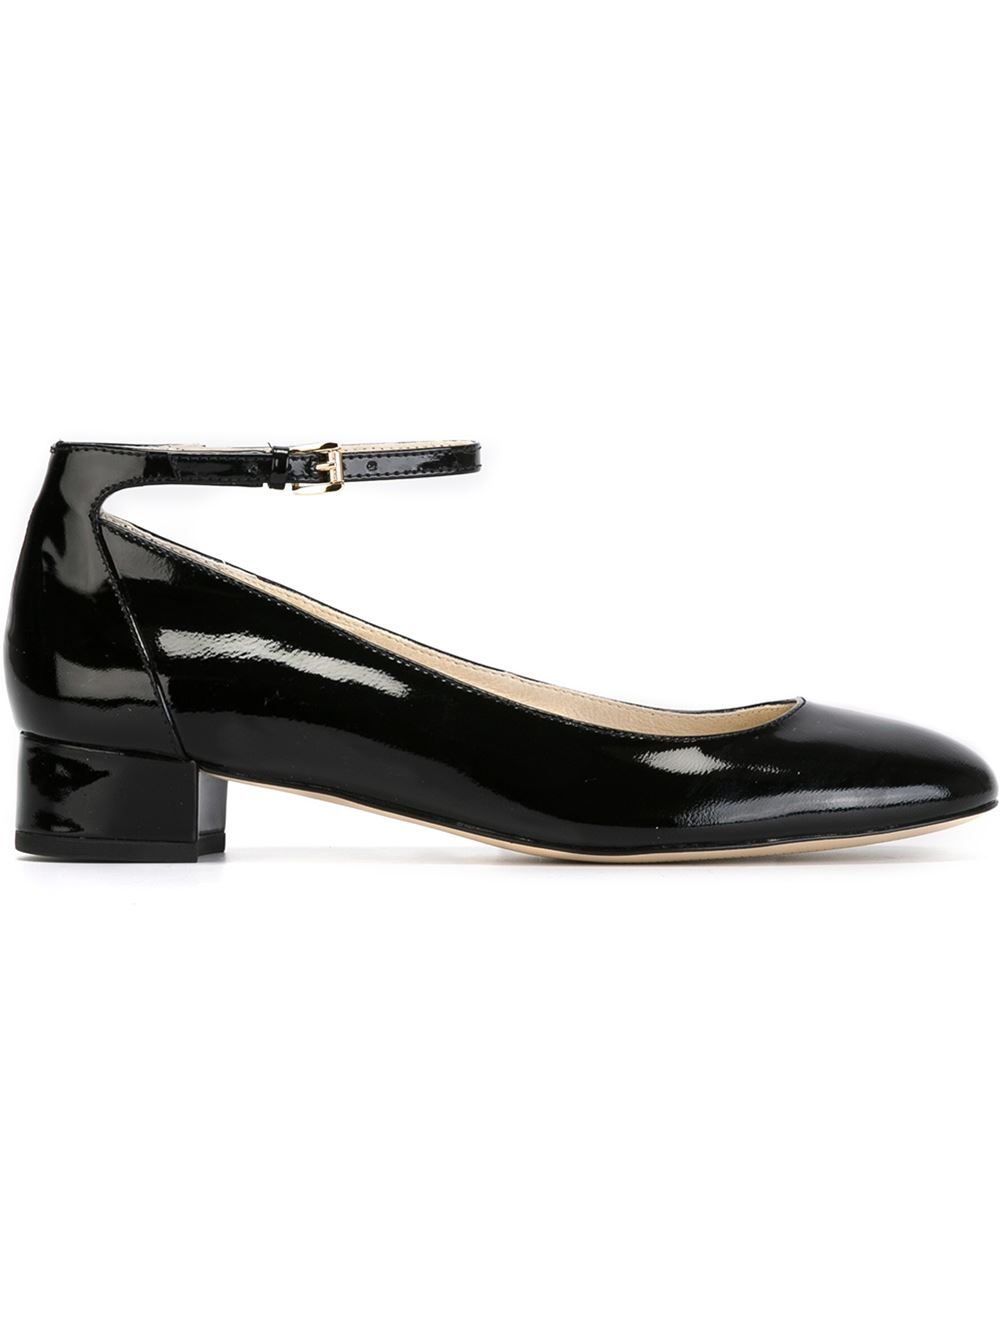 MICHAEL Michael Kors Ankle-Strap Patent-Leather Pumps in Black - Lyst